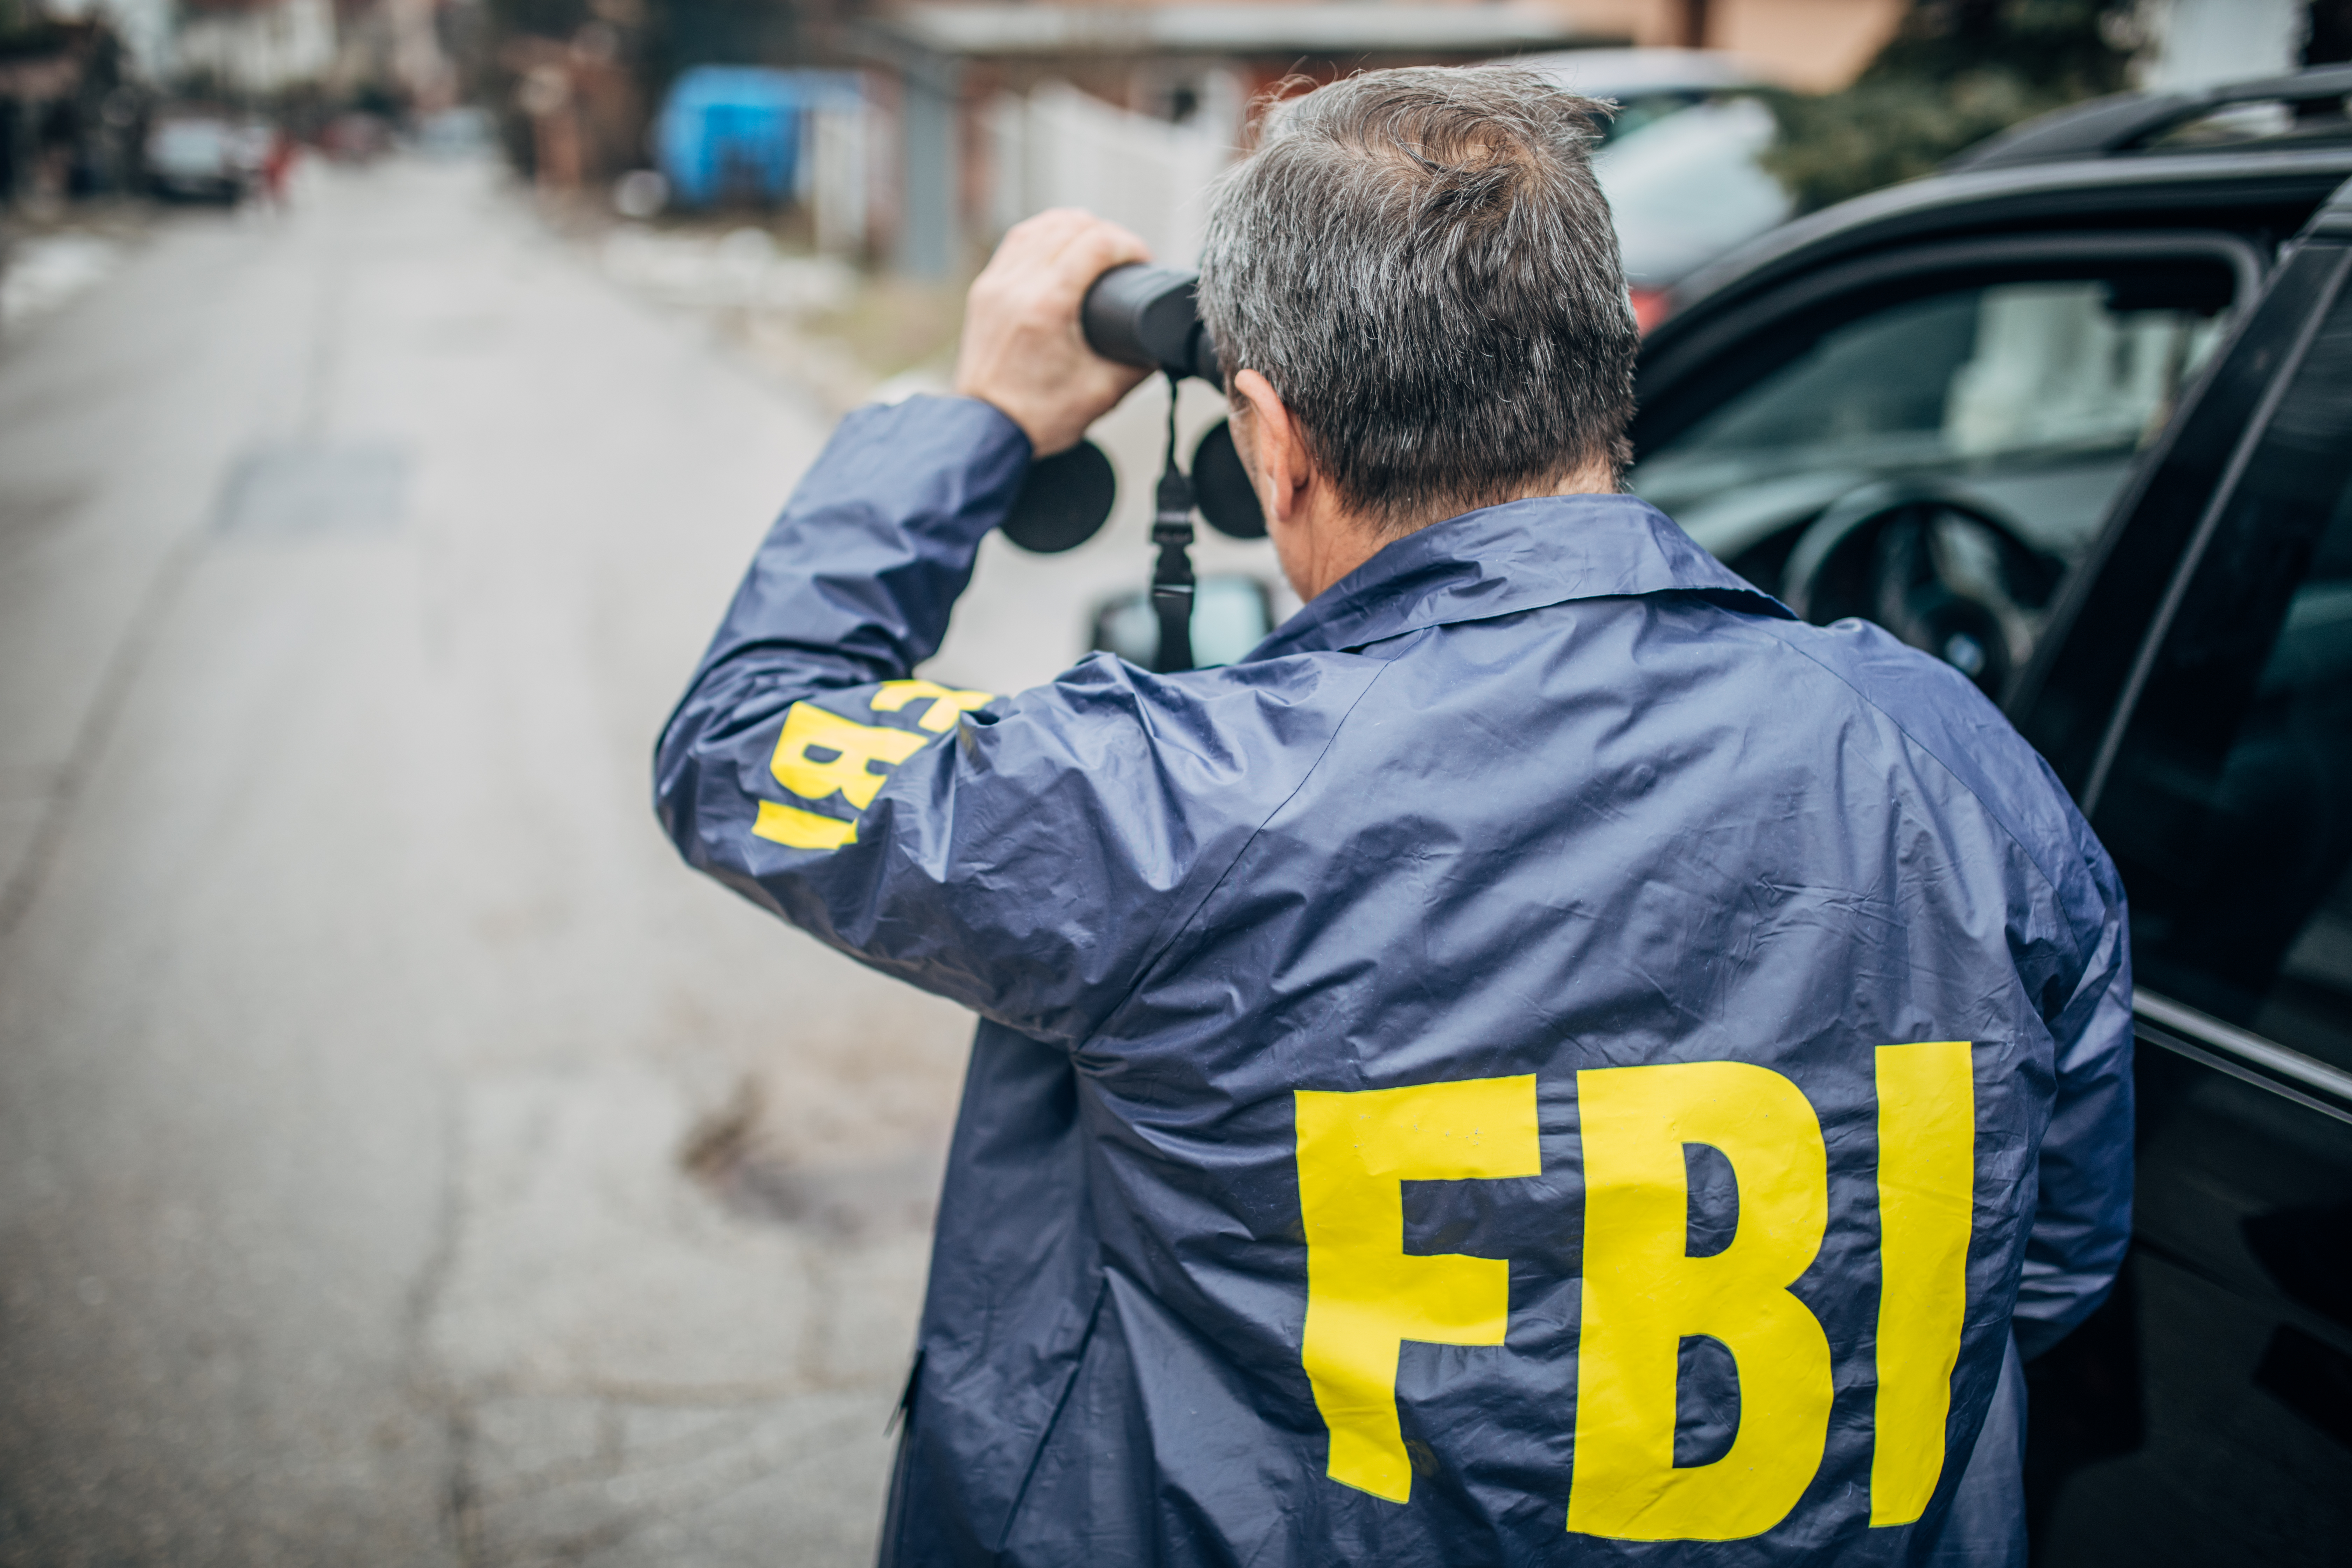 The FBI benefitting from federal system integrators